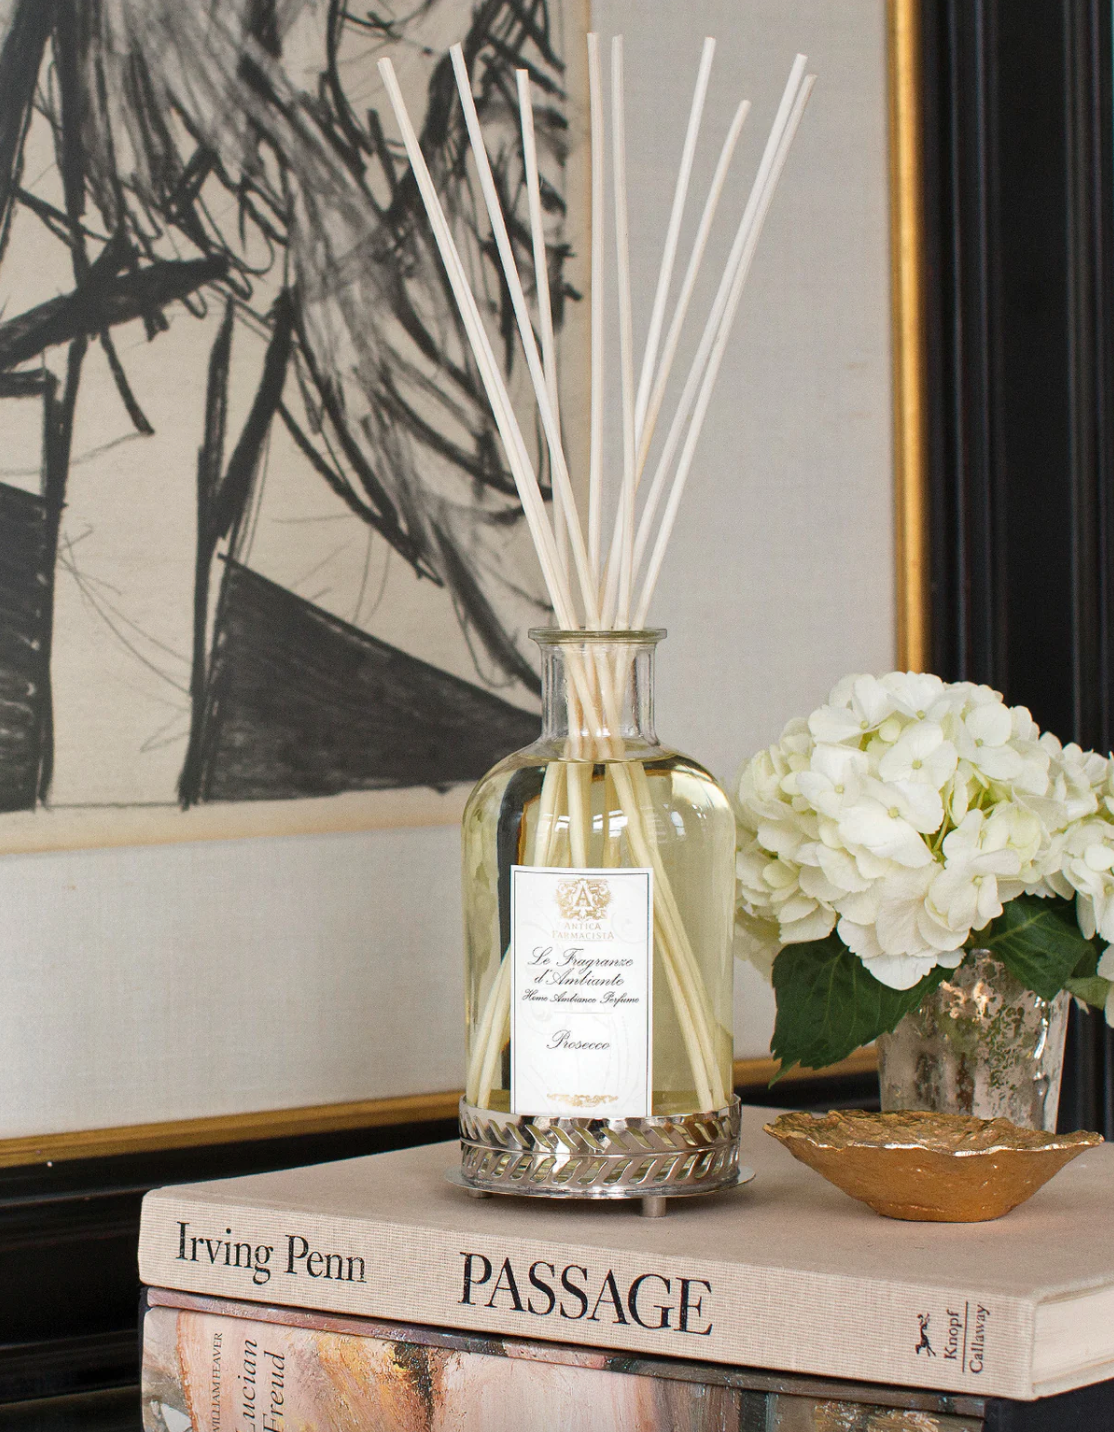 Fragrance diffuser in a beautiful home